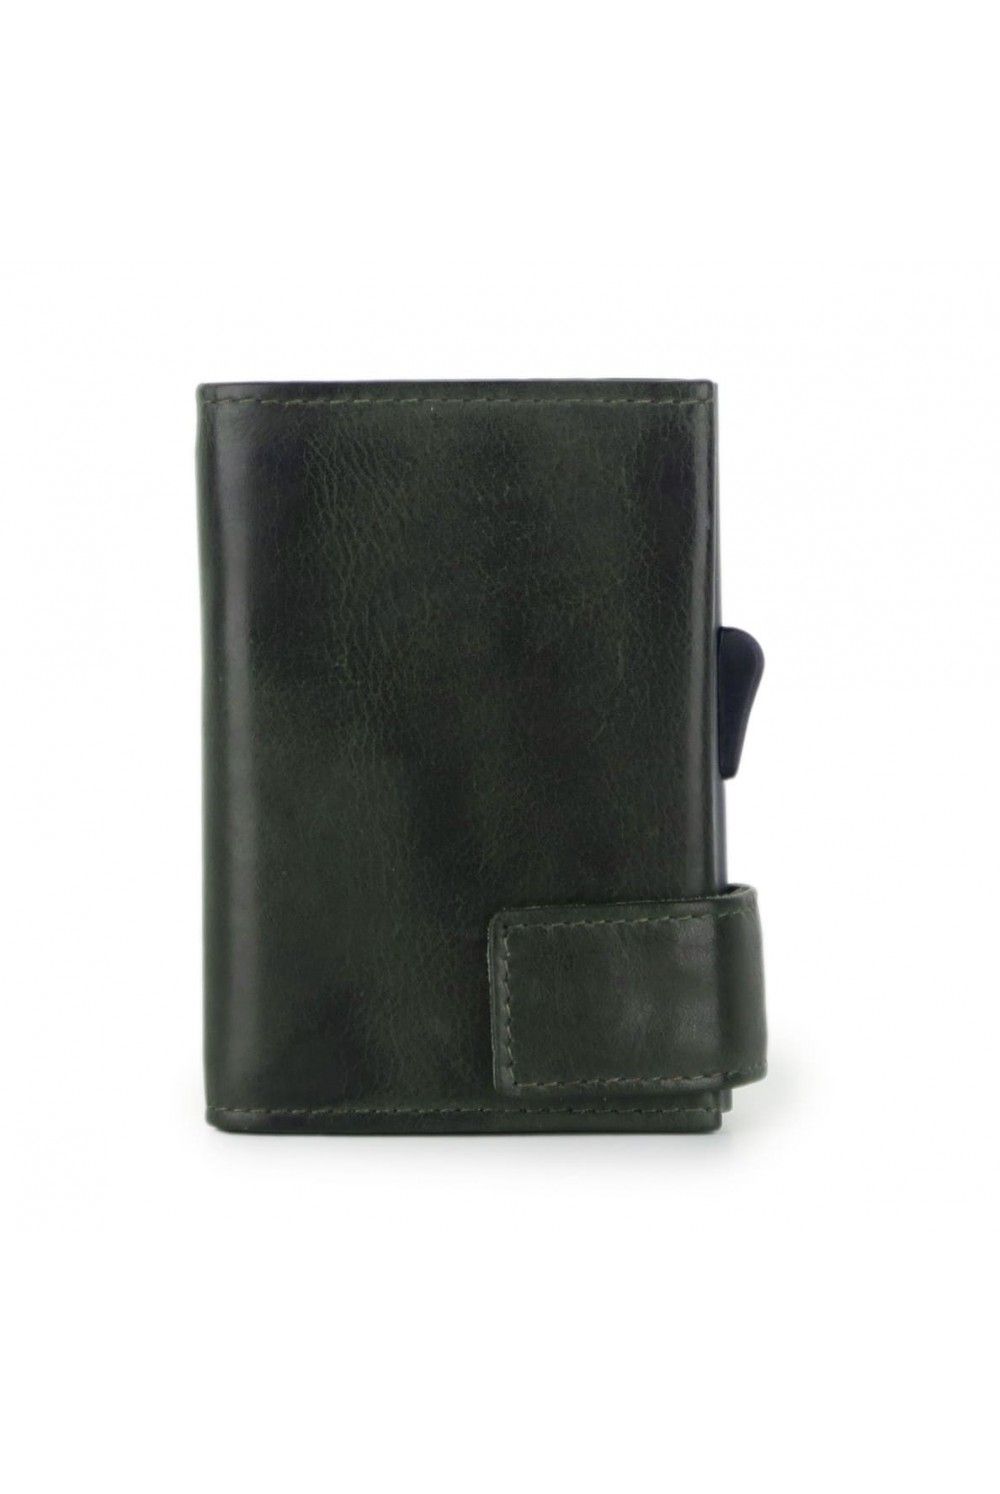 SecWal Card Case RV Leather Vintage Green